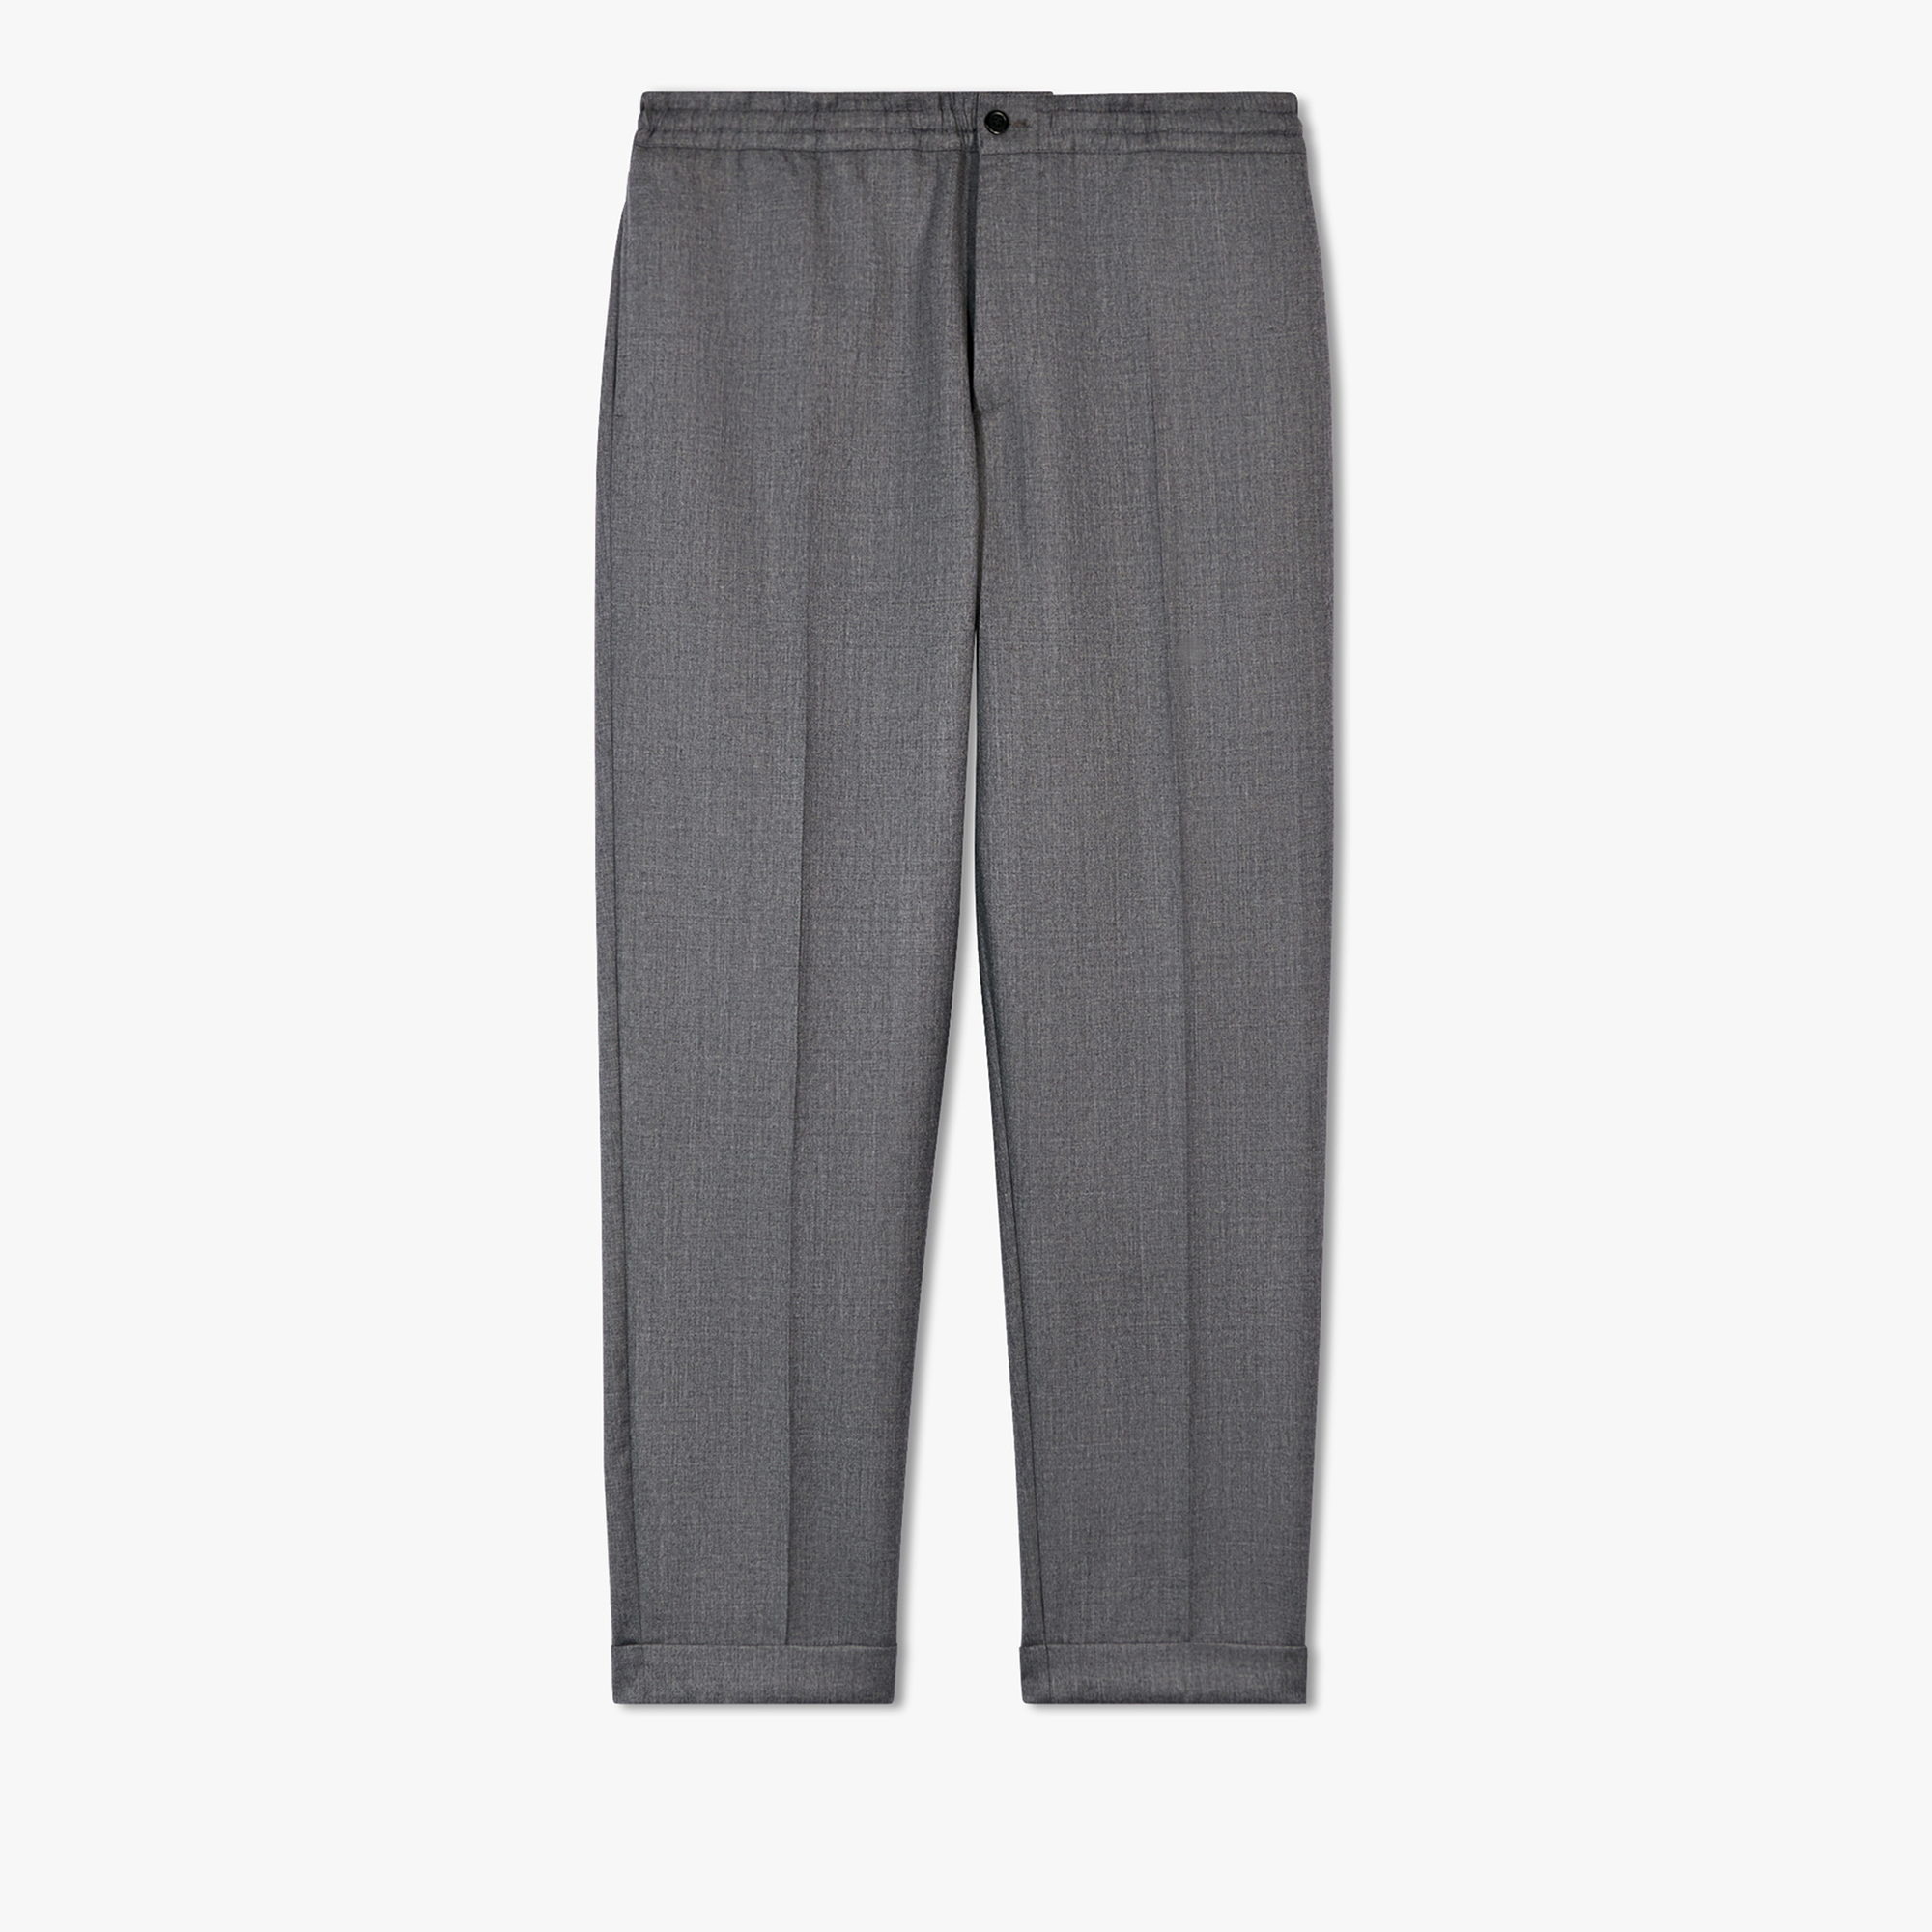 Wool Double Face Drawstring Trousers, STEEL GREY, hi-res